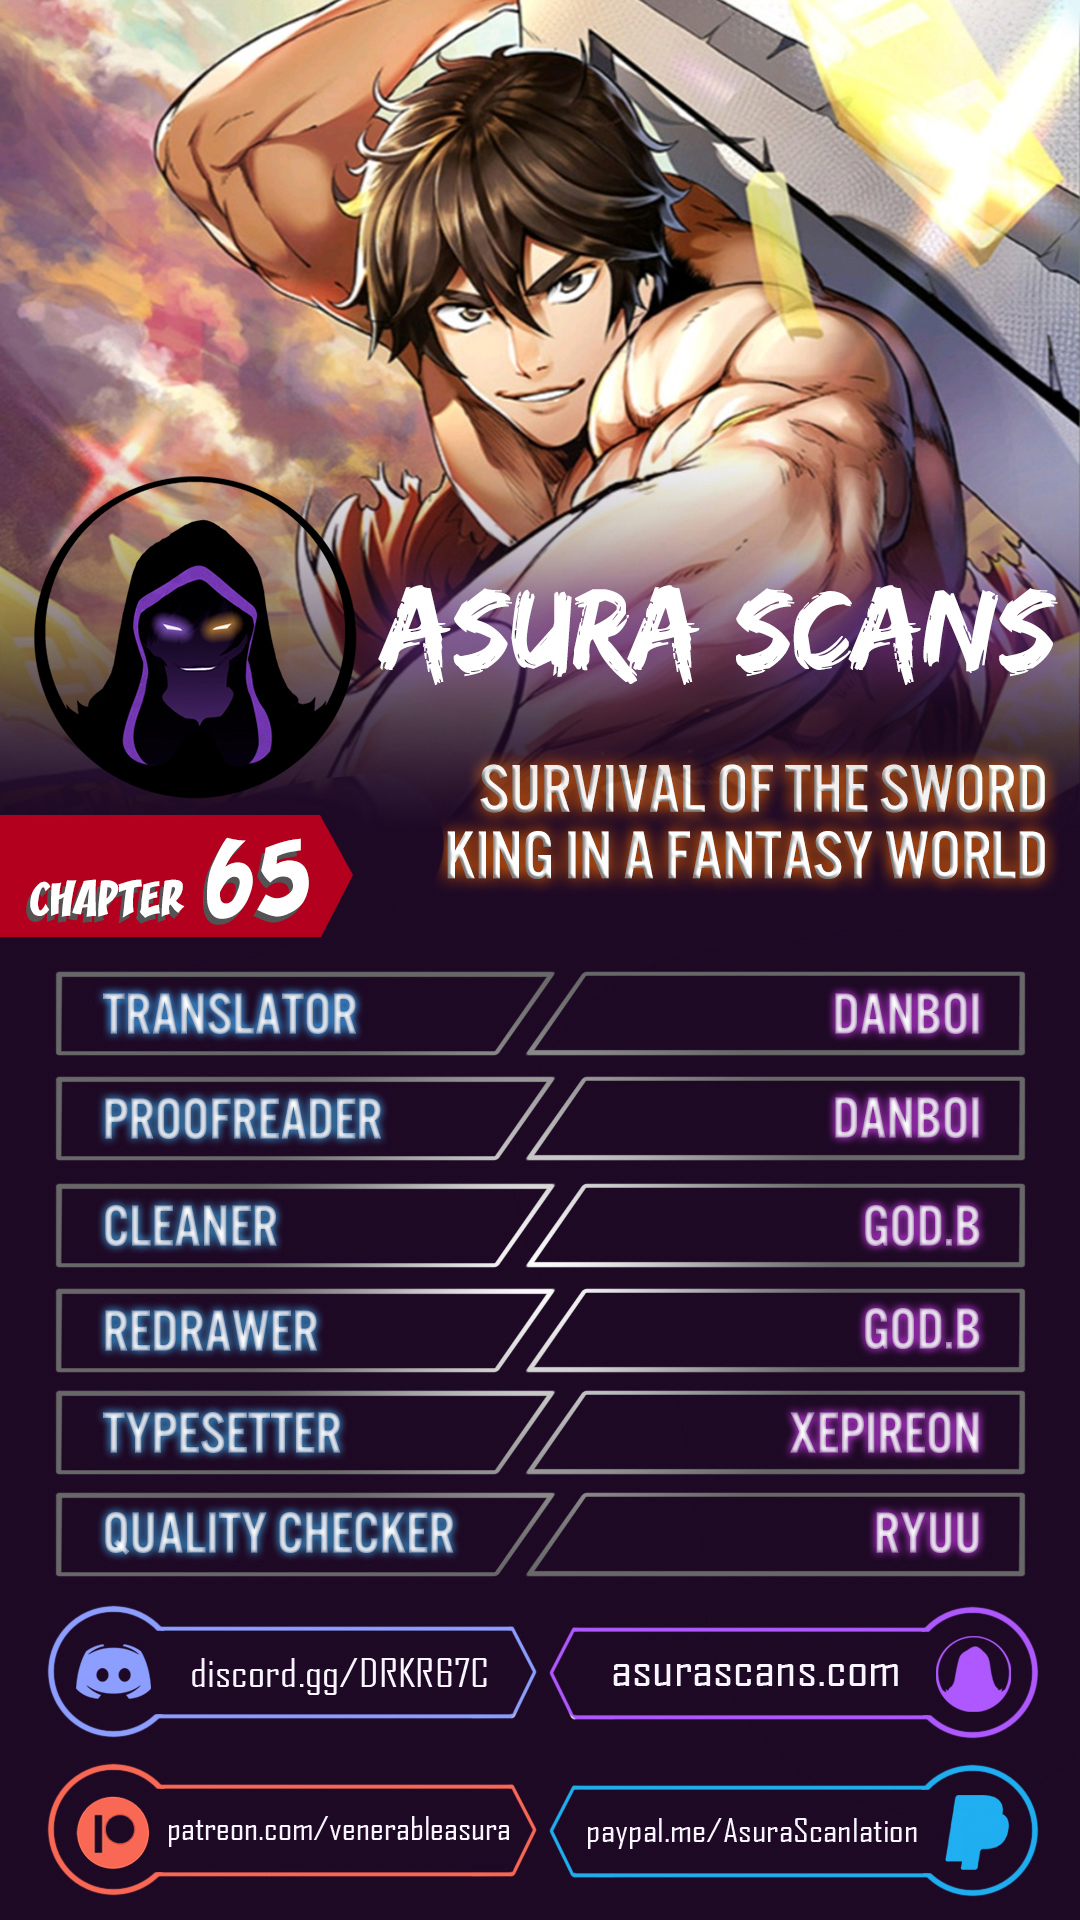 The Survival Story of the Sword King in Another World 65